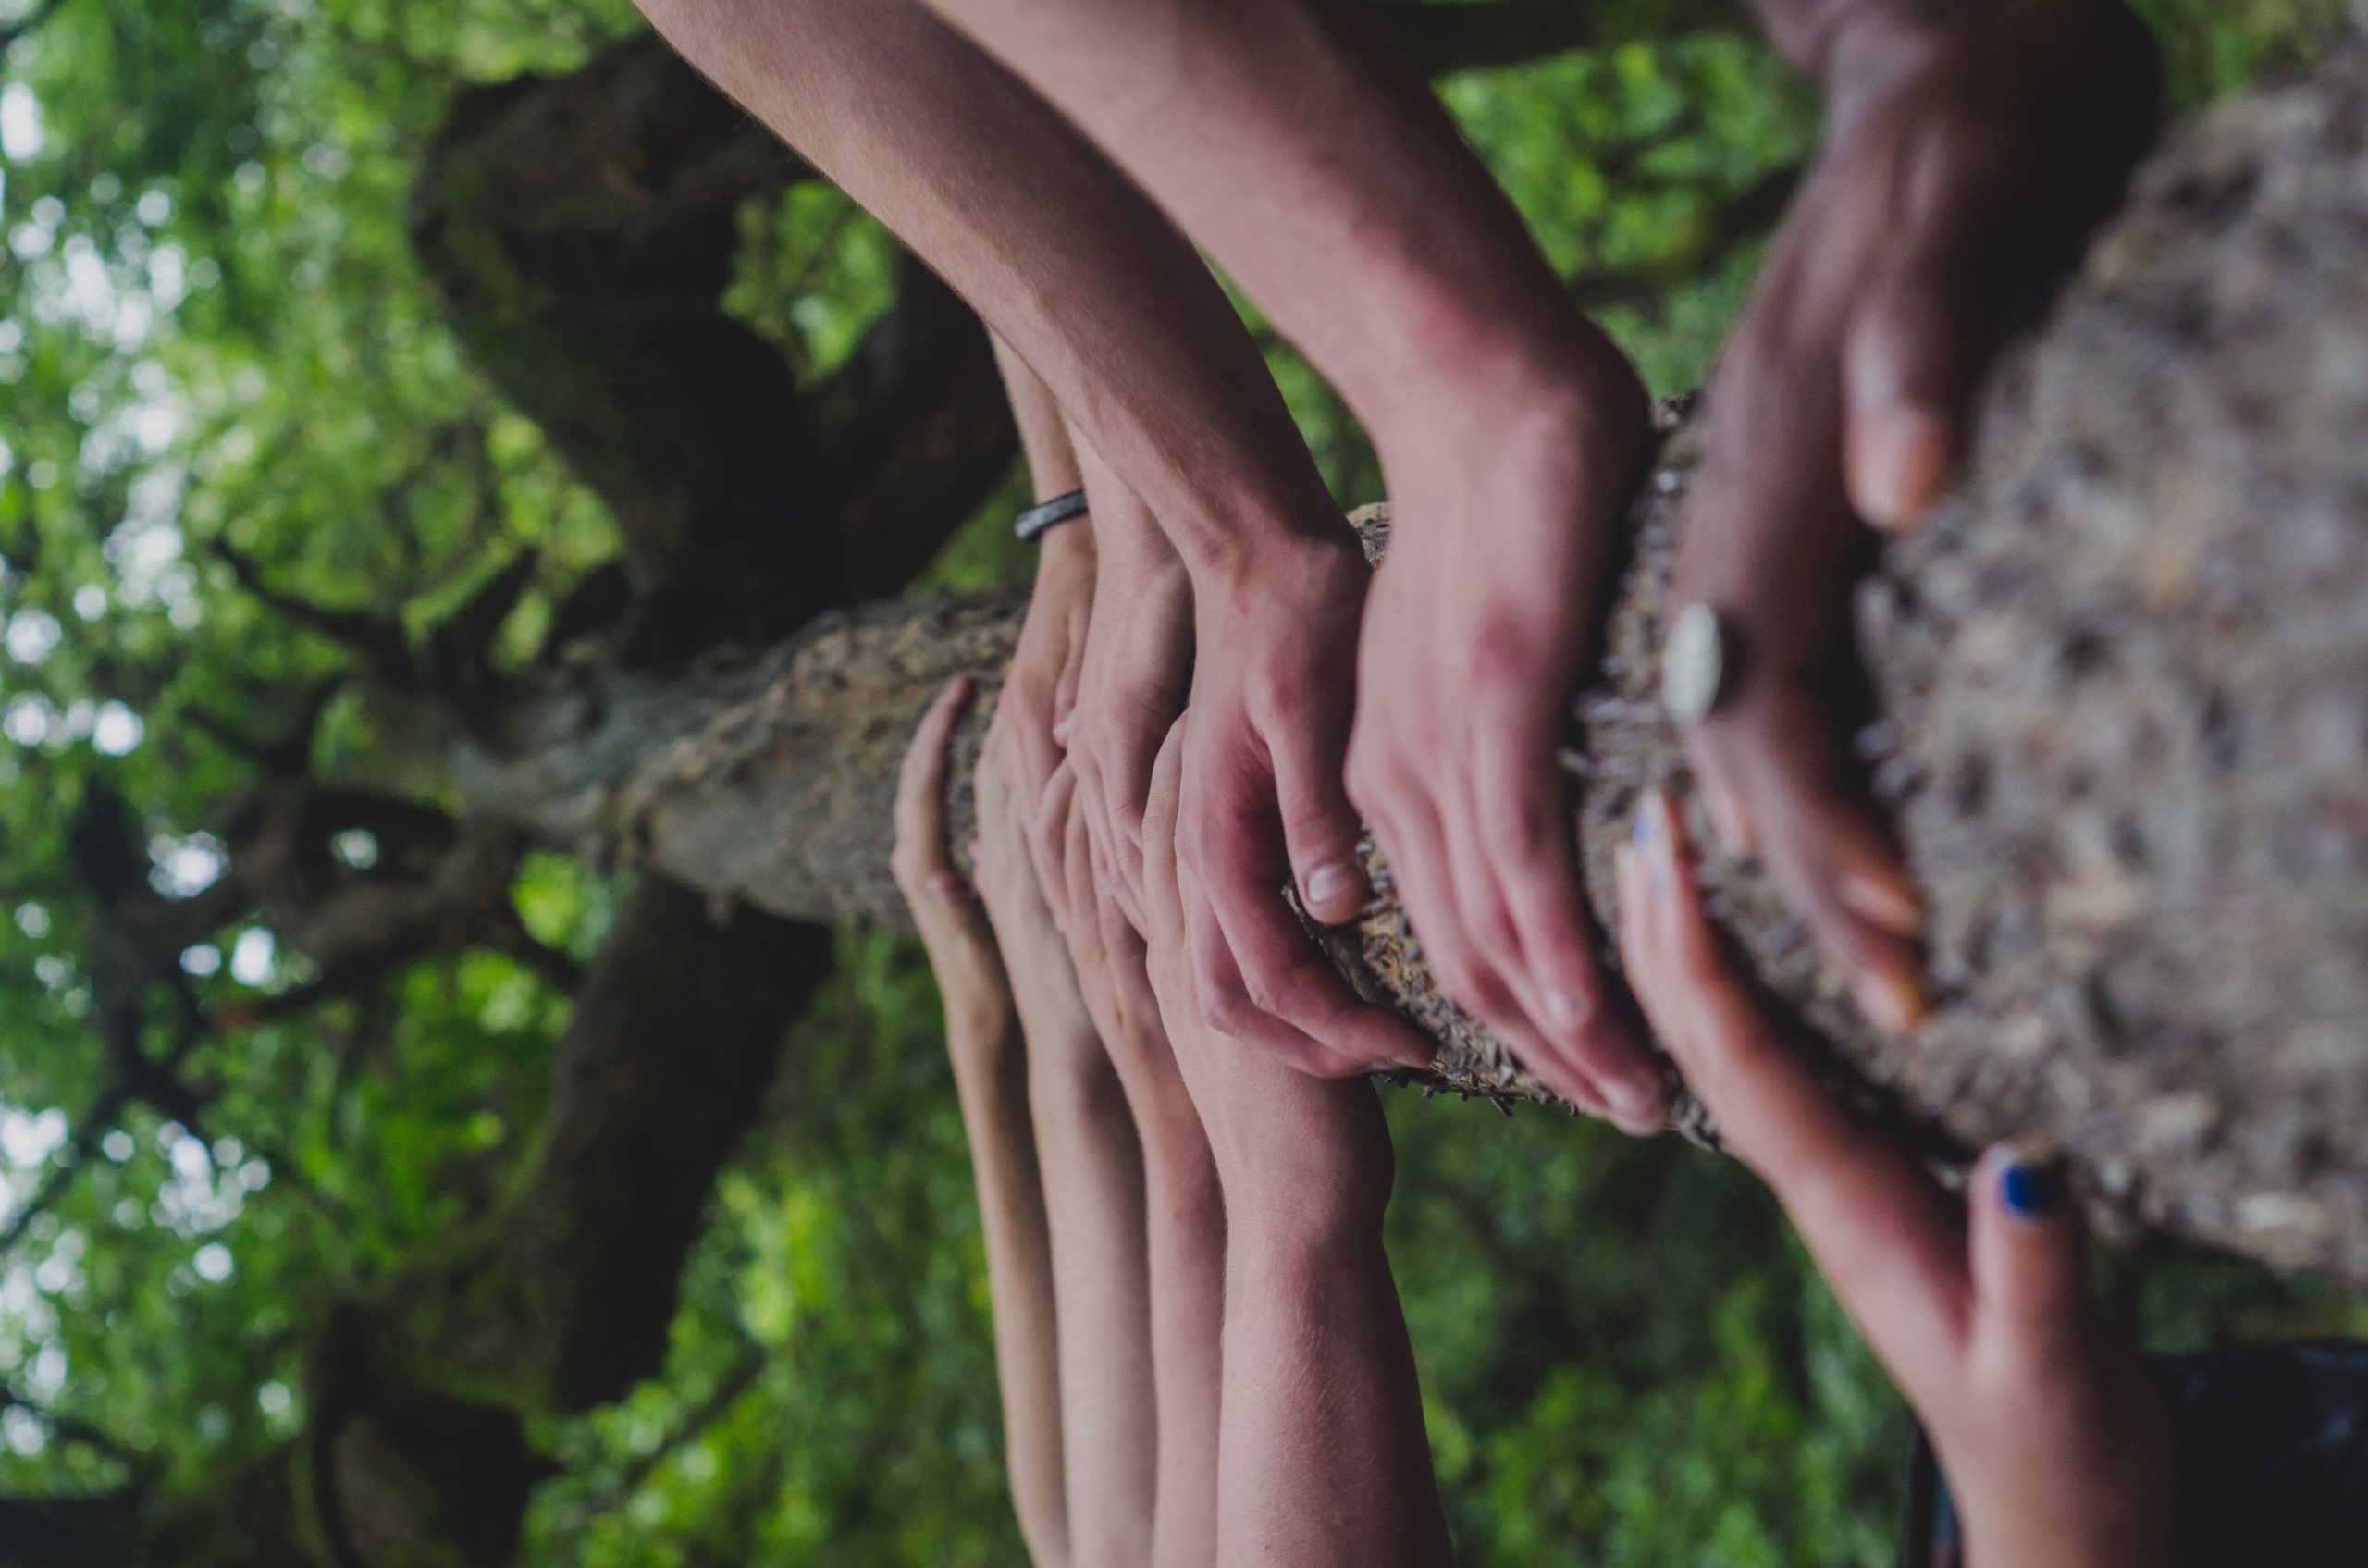 Sage Scifi: We Must Be Connected - Hands meet together on a tree in a symbol of community